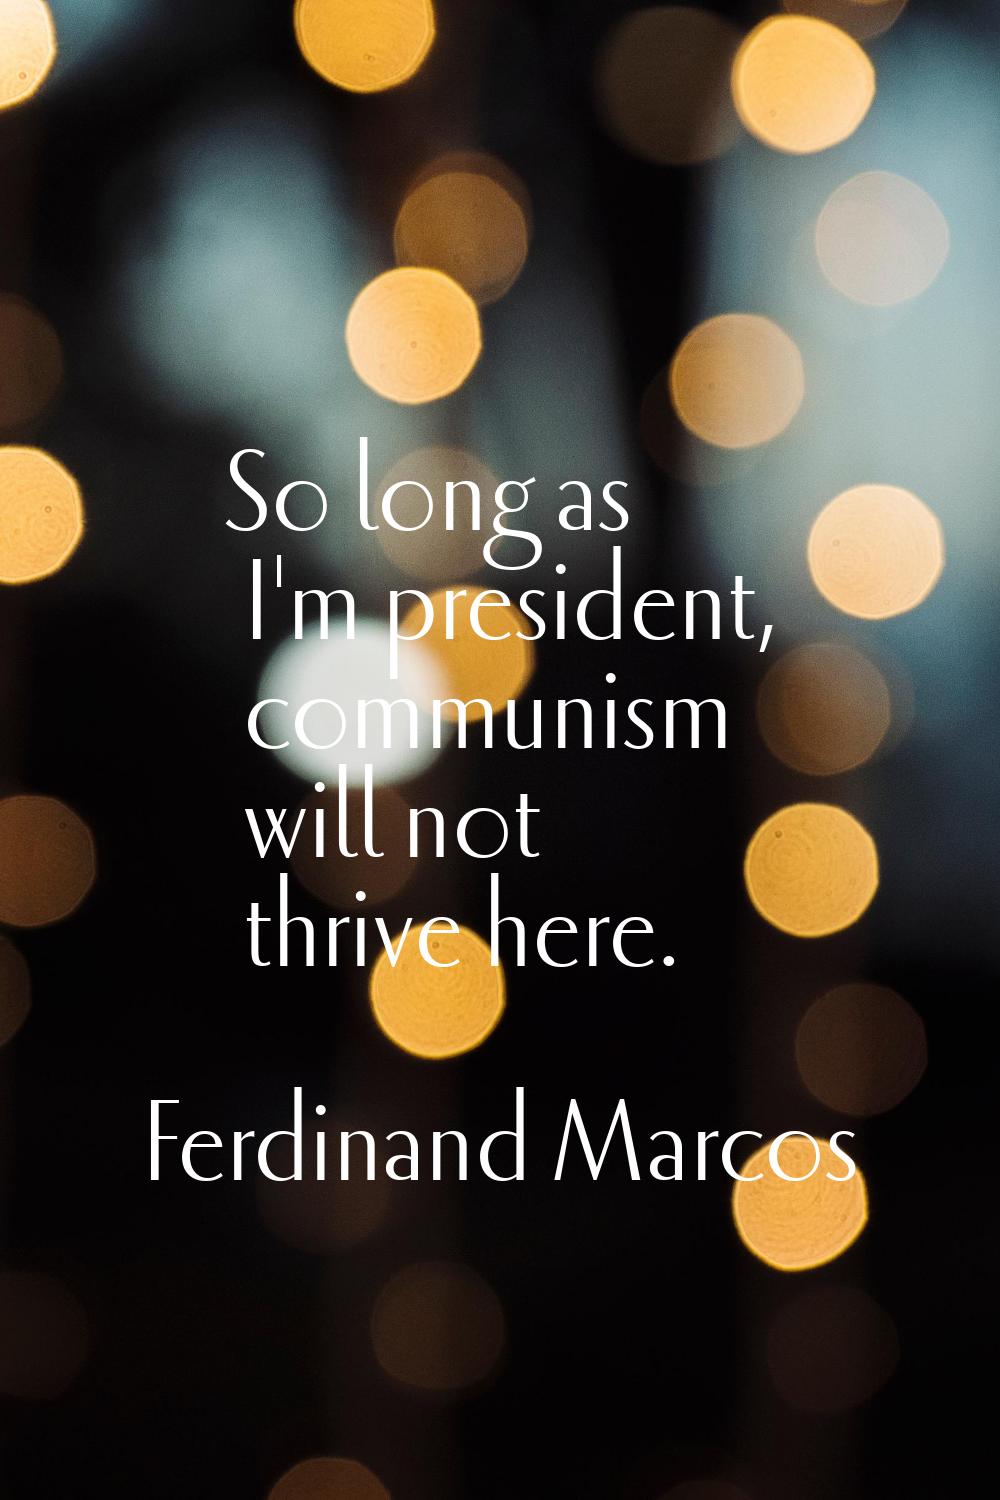 So long as I'm president, communism will not thrive here.